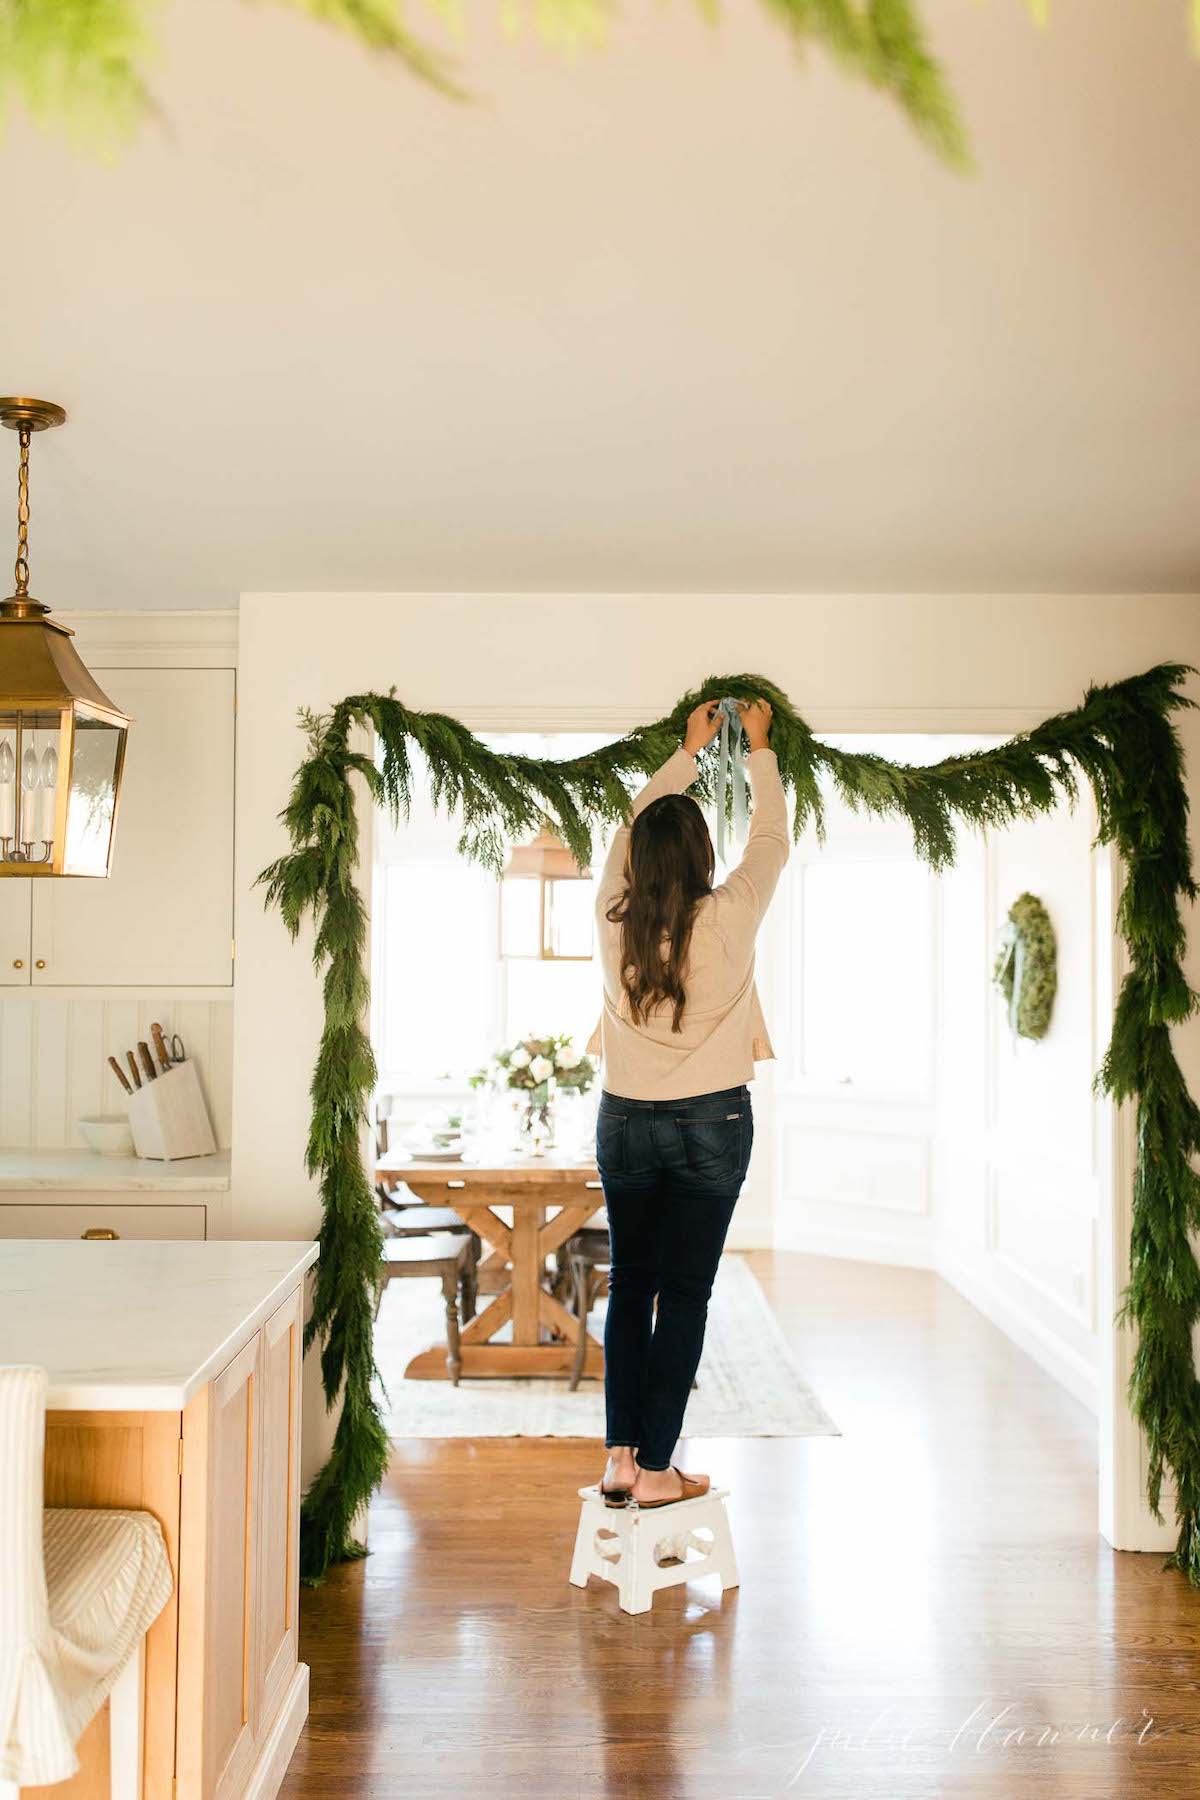 A woman is carefully hanging a blue Christmas garland in her kitchen, adorning her holiday home with festive decorations.